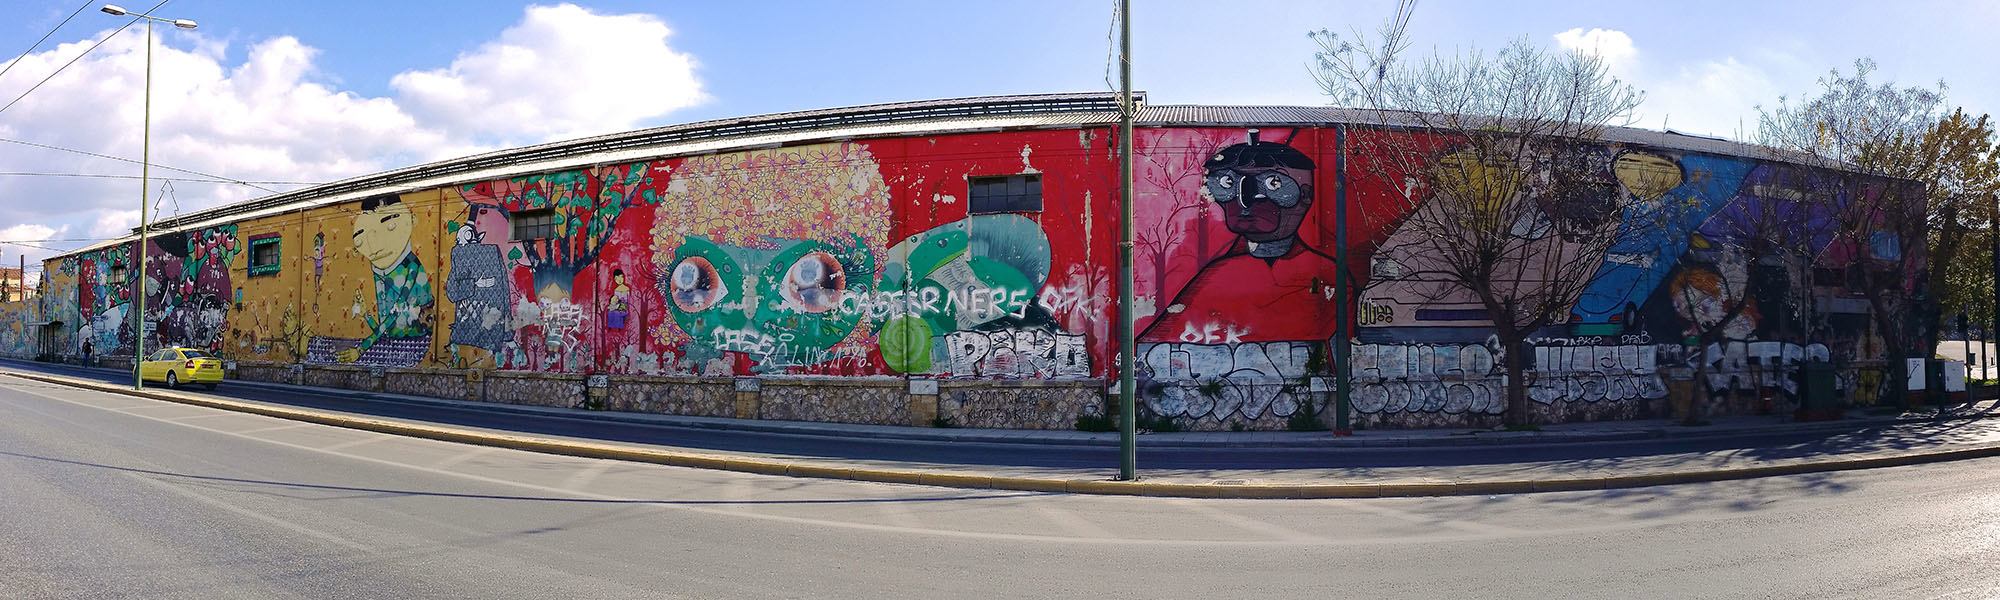 Pireos Street,offbeat things to do in Athens